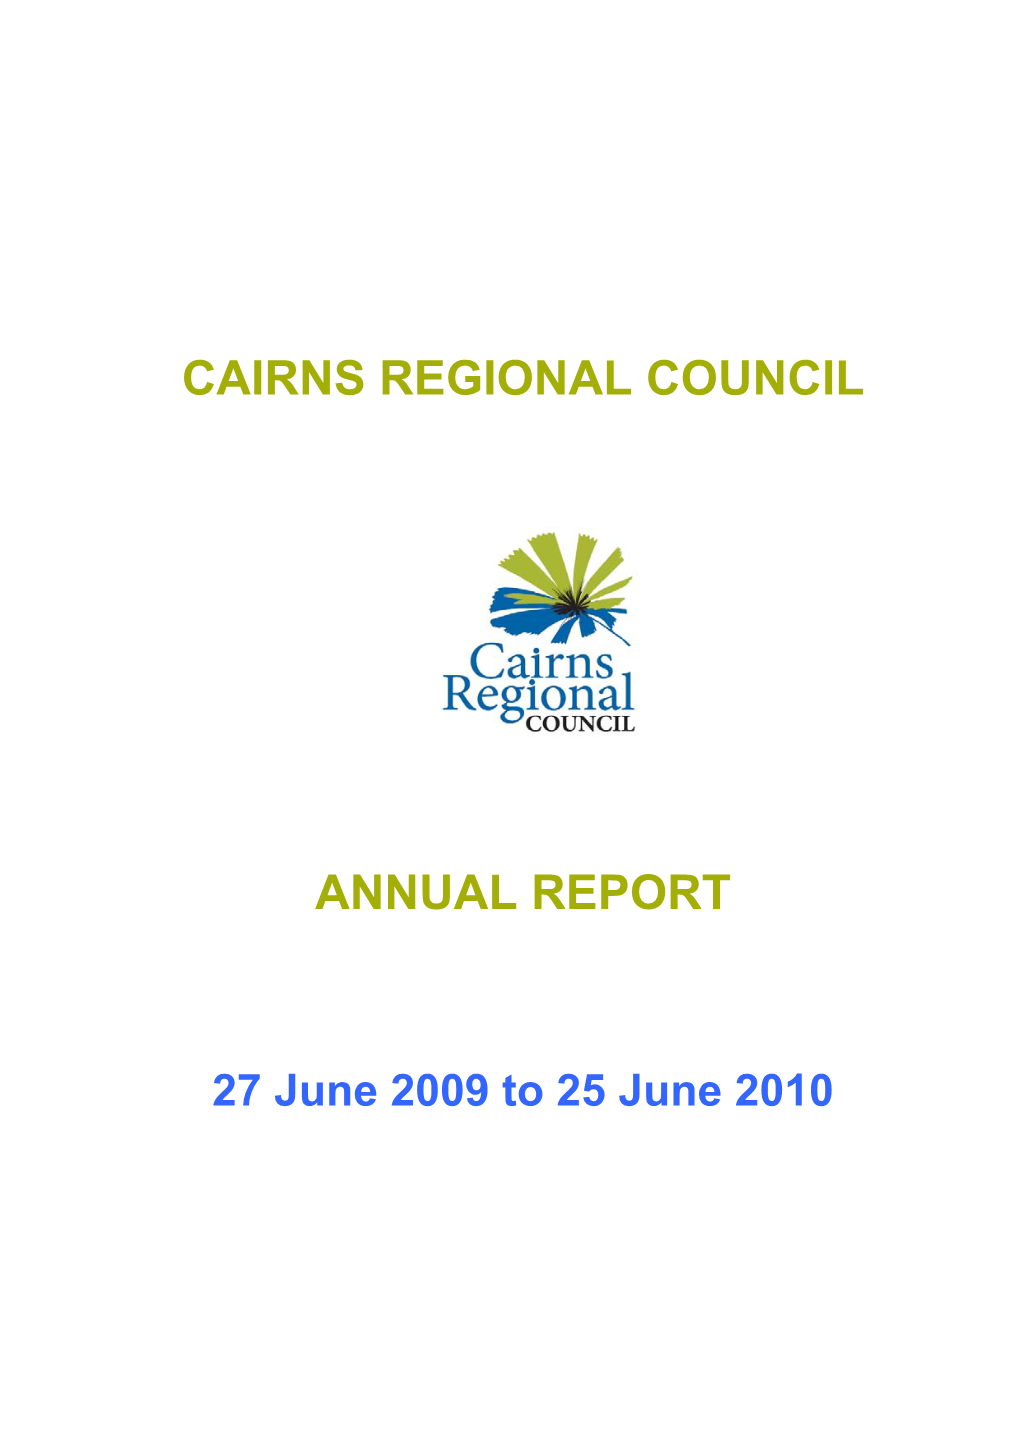 Cairns Regional Council Annual Report